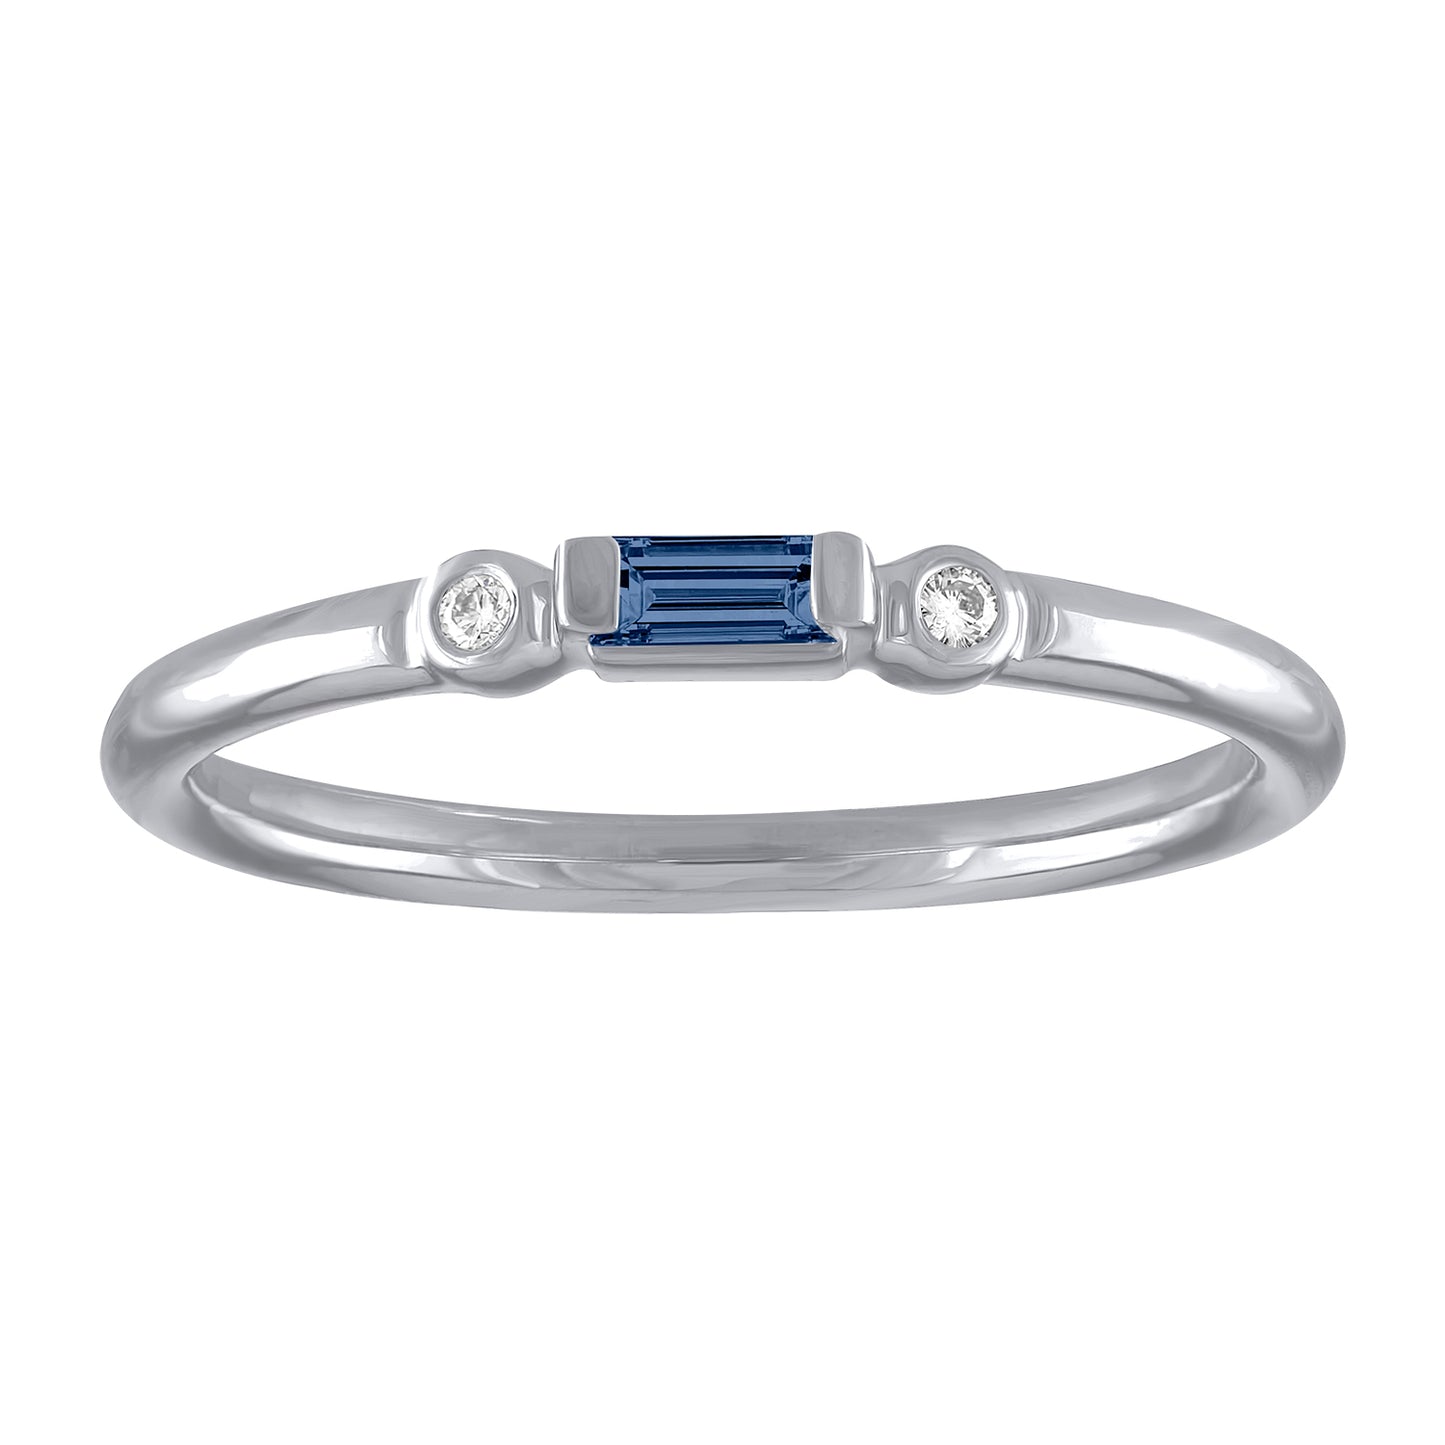 White gold skinny band with a sapphire baguette in the center and two round diamonds on the side. 